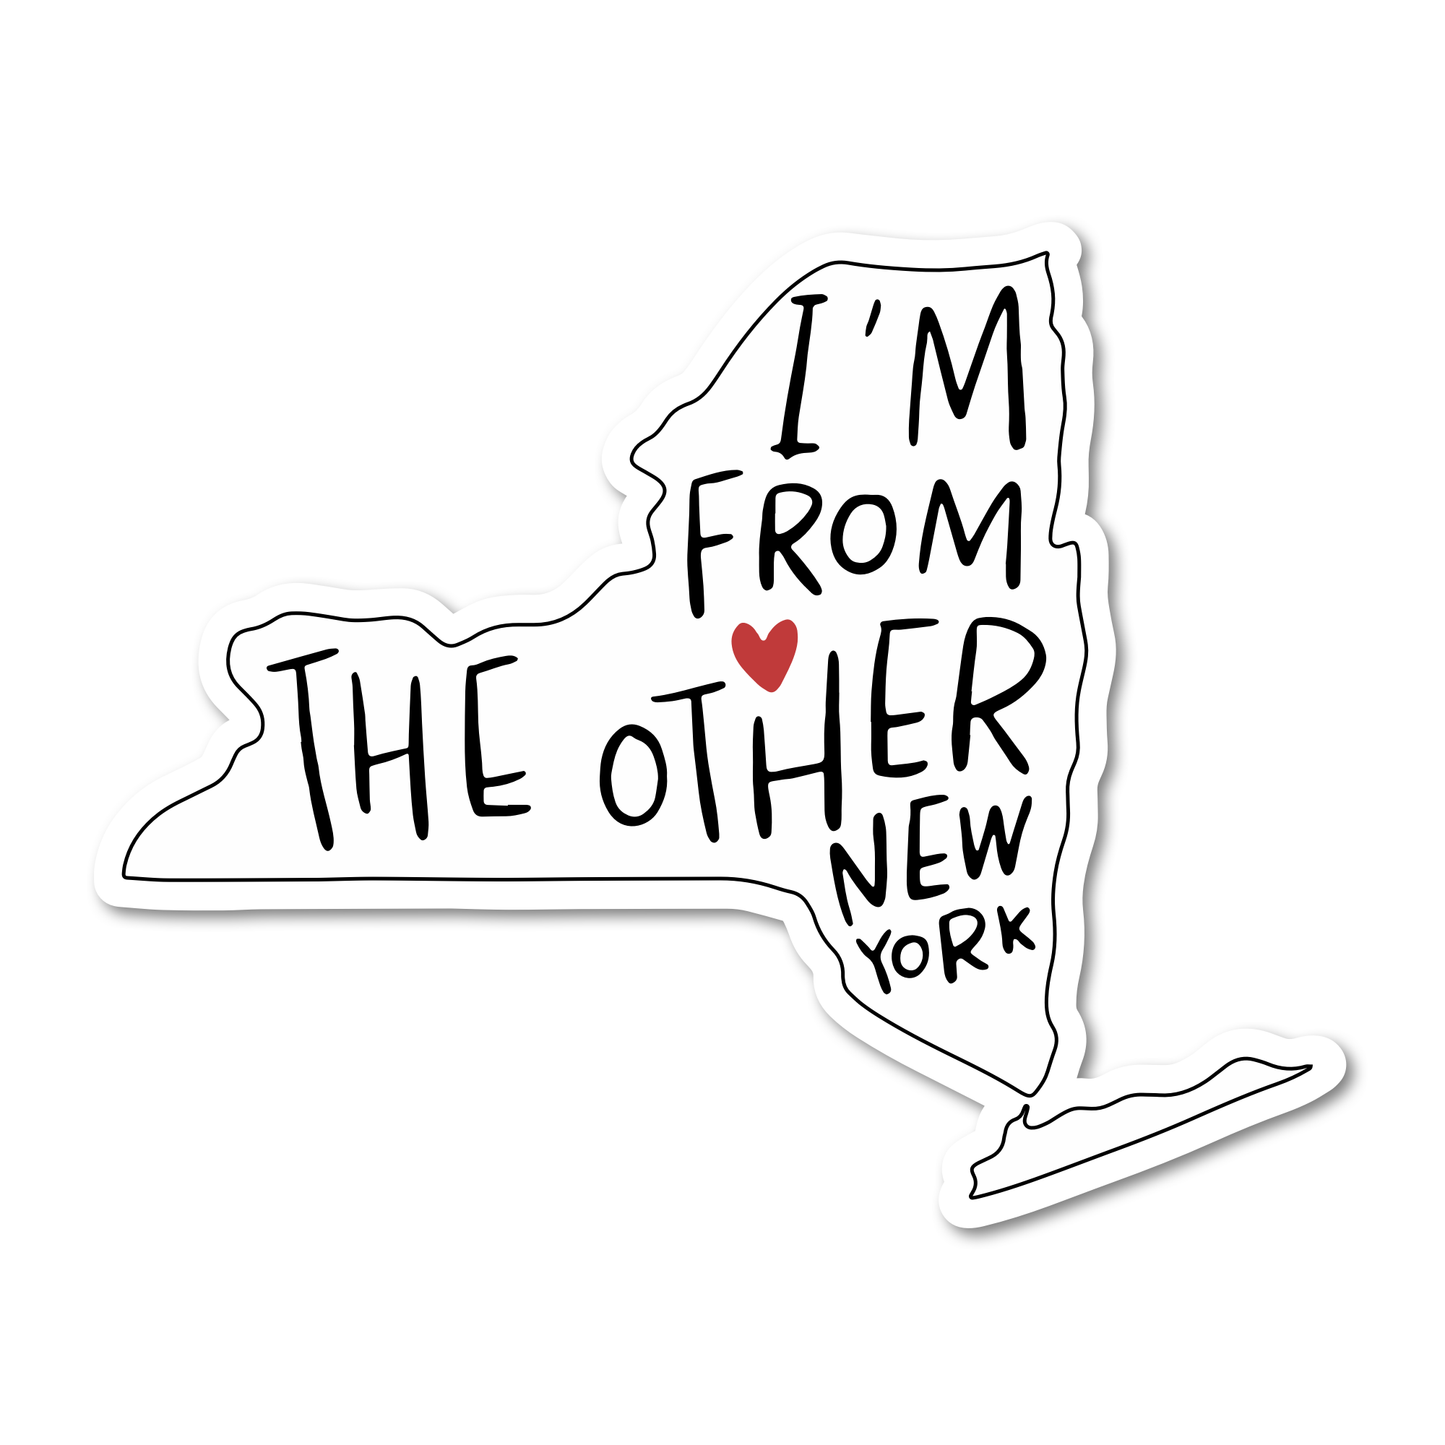 Sticker-NY-04: I'm From The Other New York